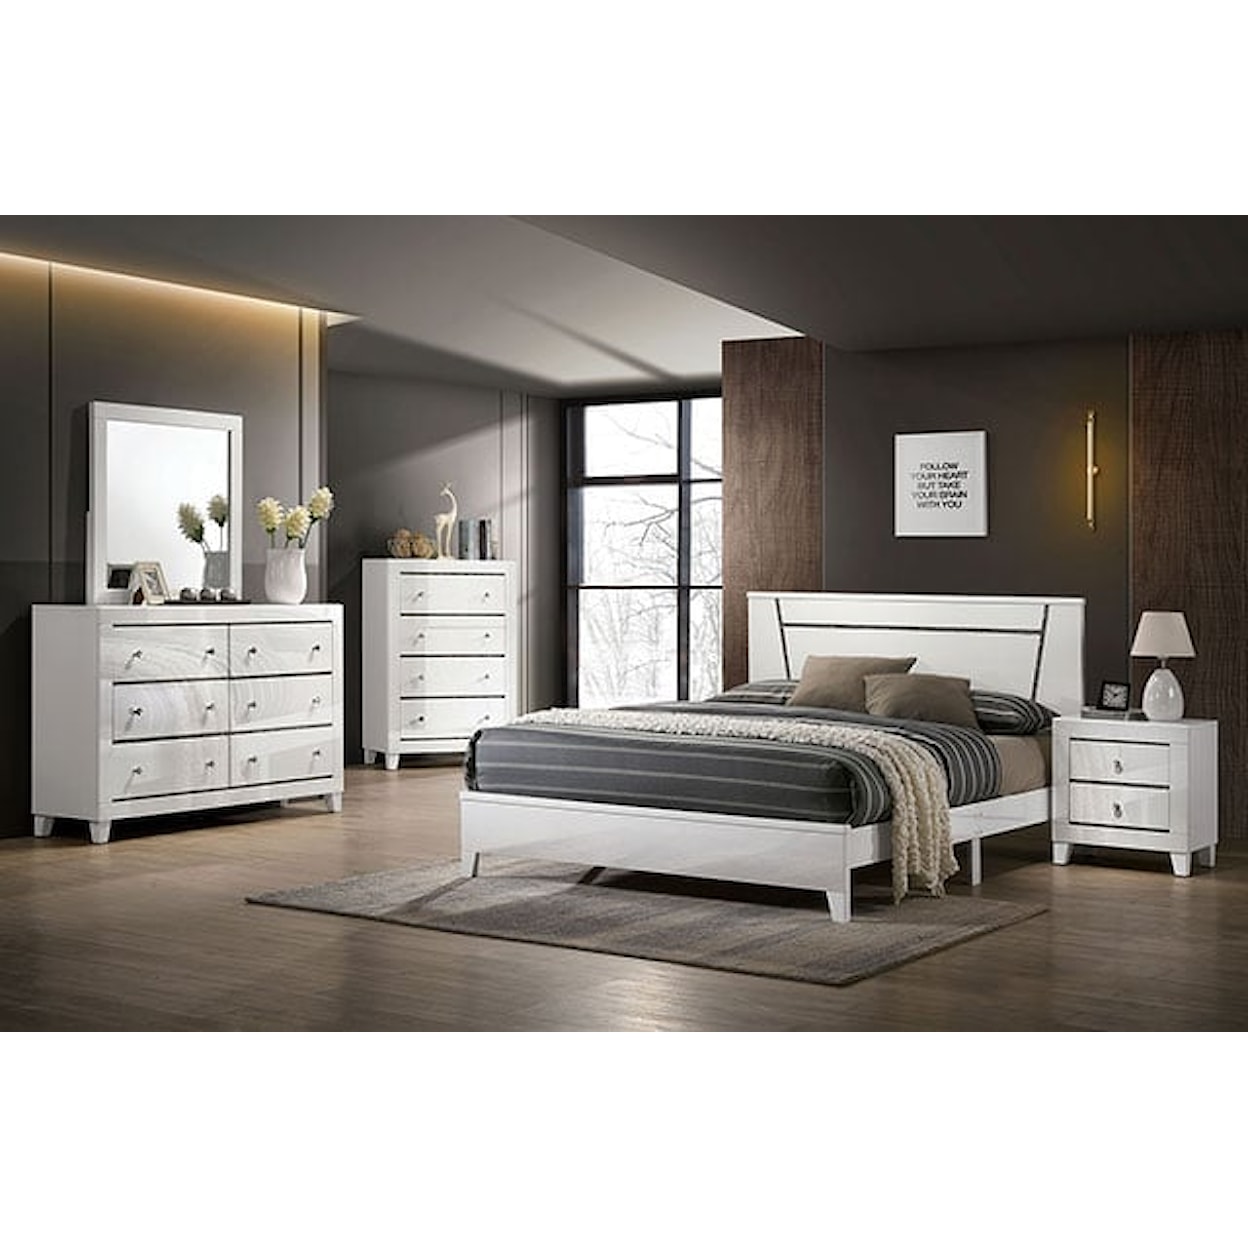 Furniture of America - FOA Magdeburg Queen Bedroom Group